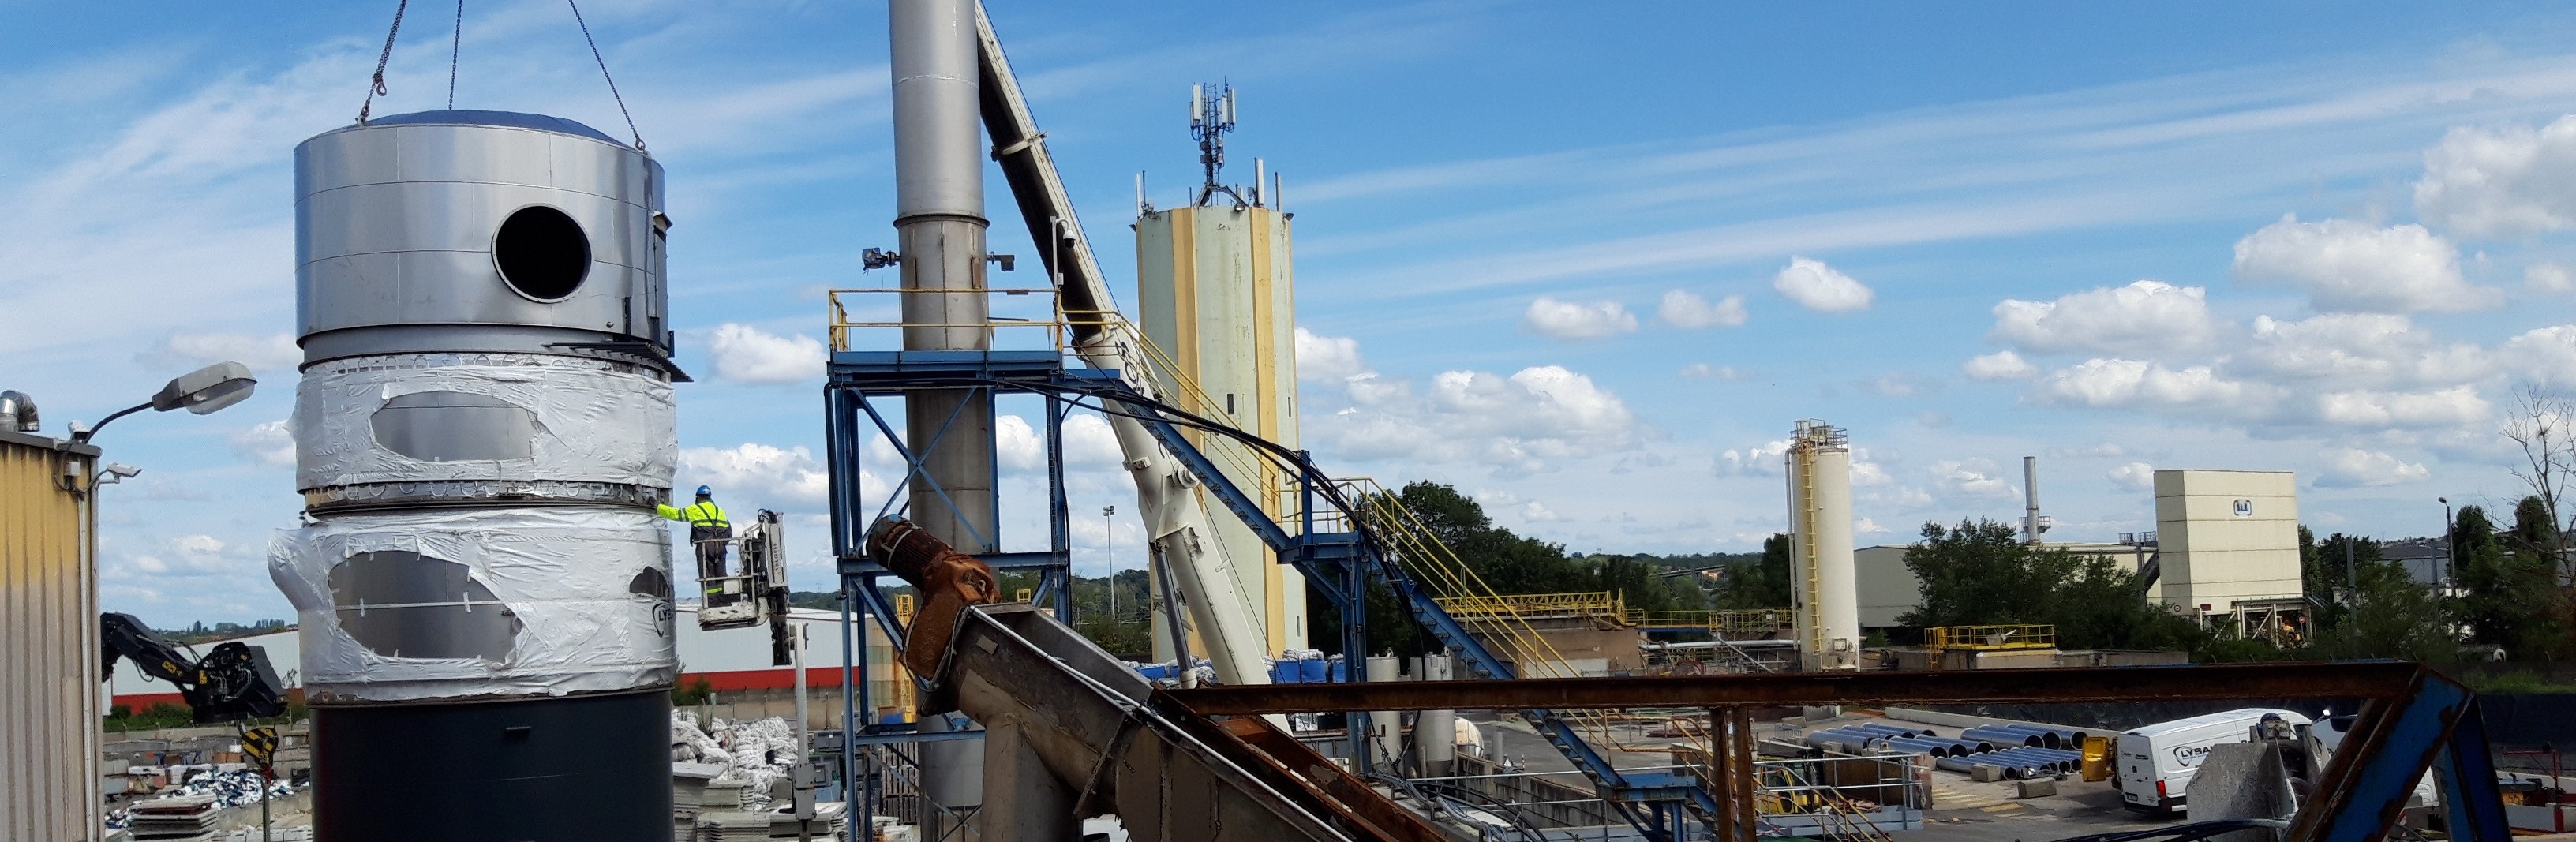 Replacement of the dust collector on the RCX site in Villefranche